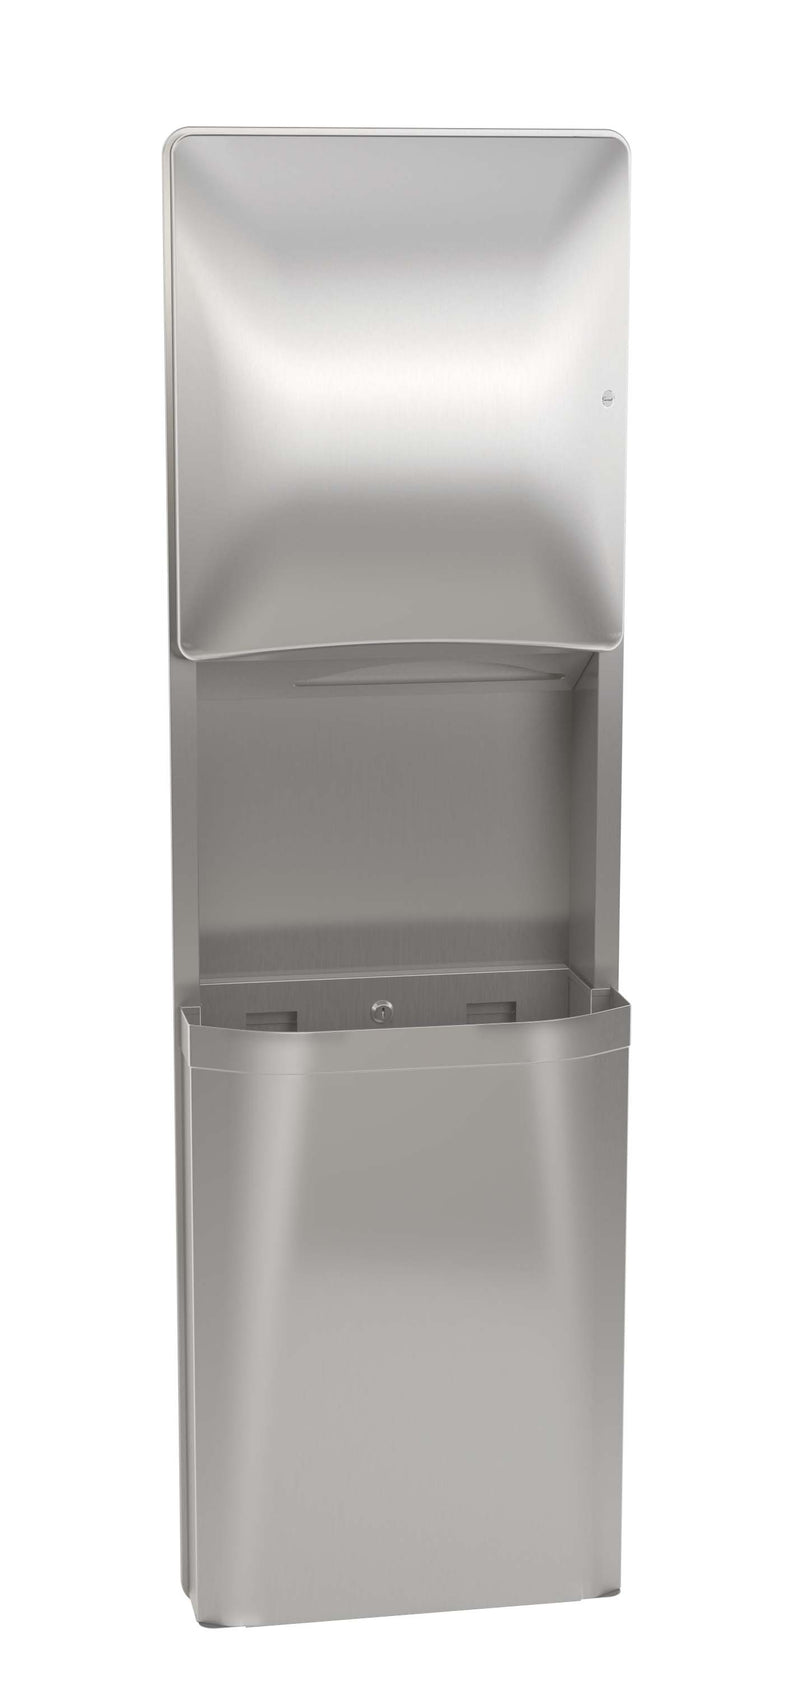 Bradley 2A15-1136 Paper Towel Dispenser Waste Receptacle Unit, Surface Mounted